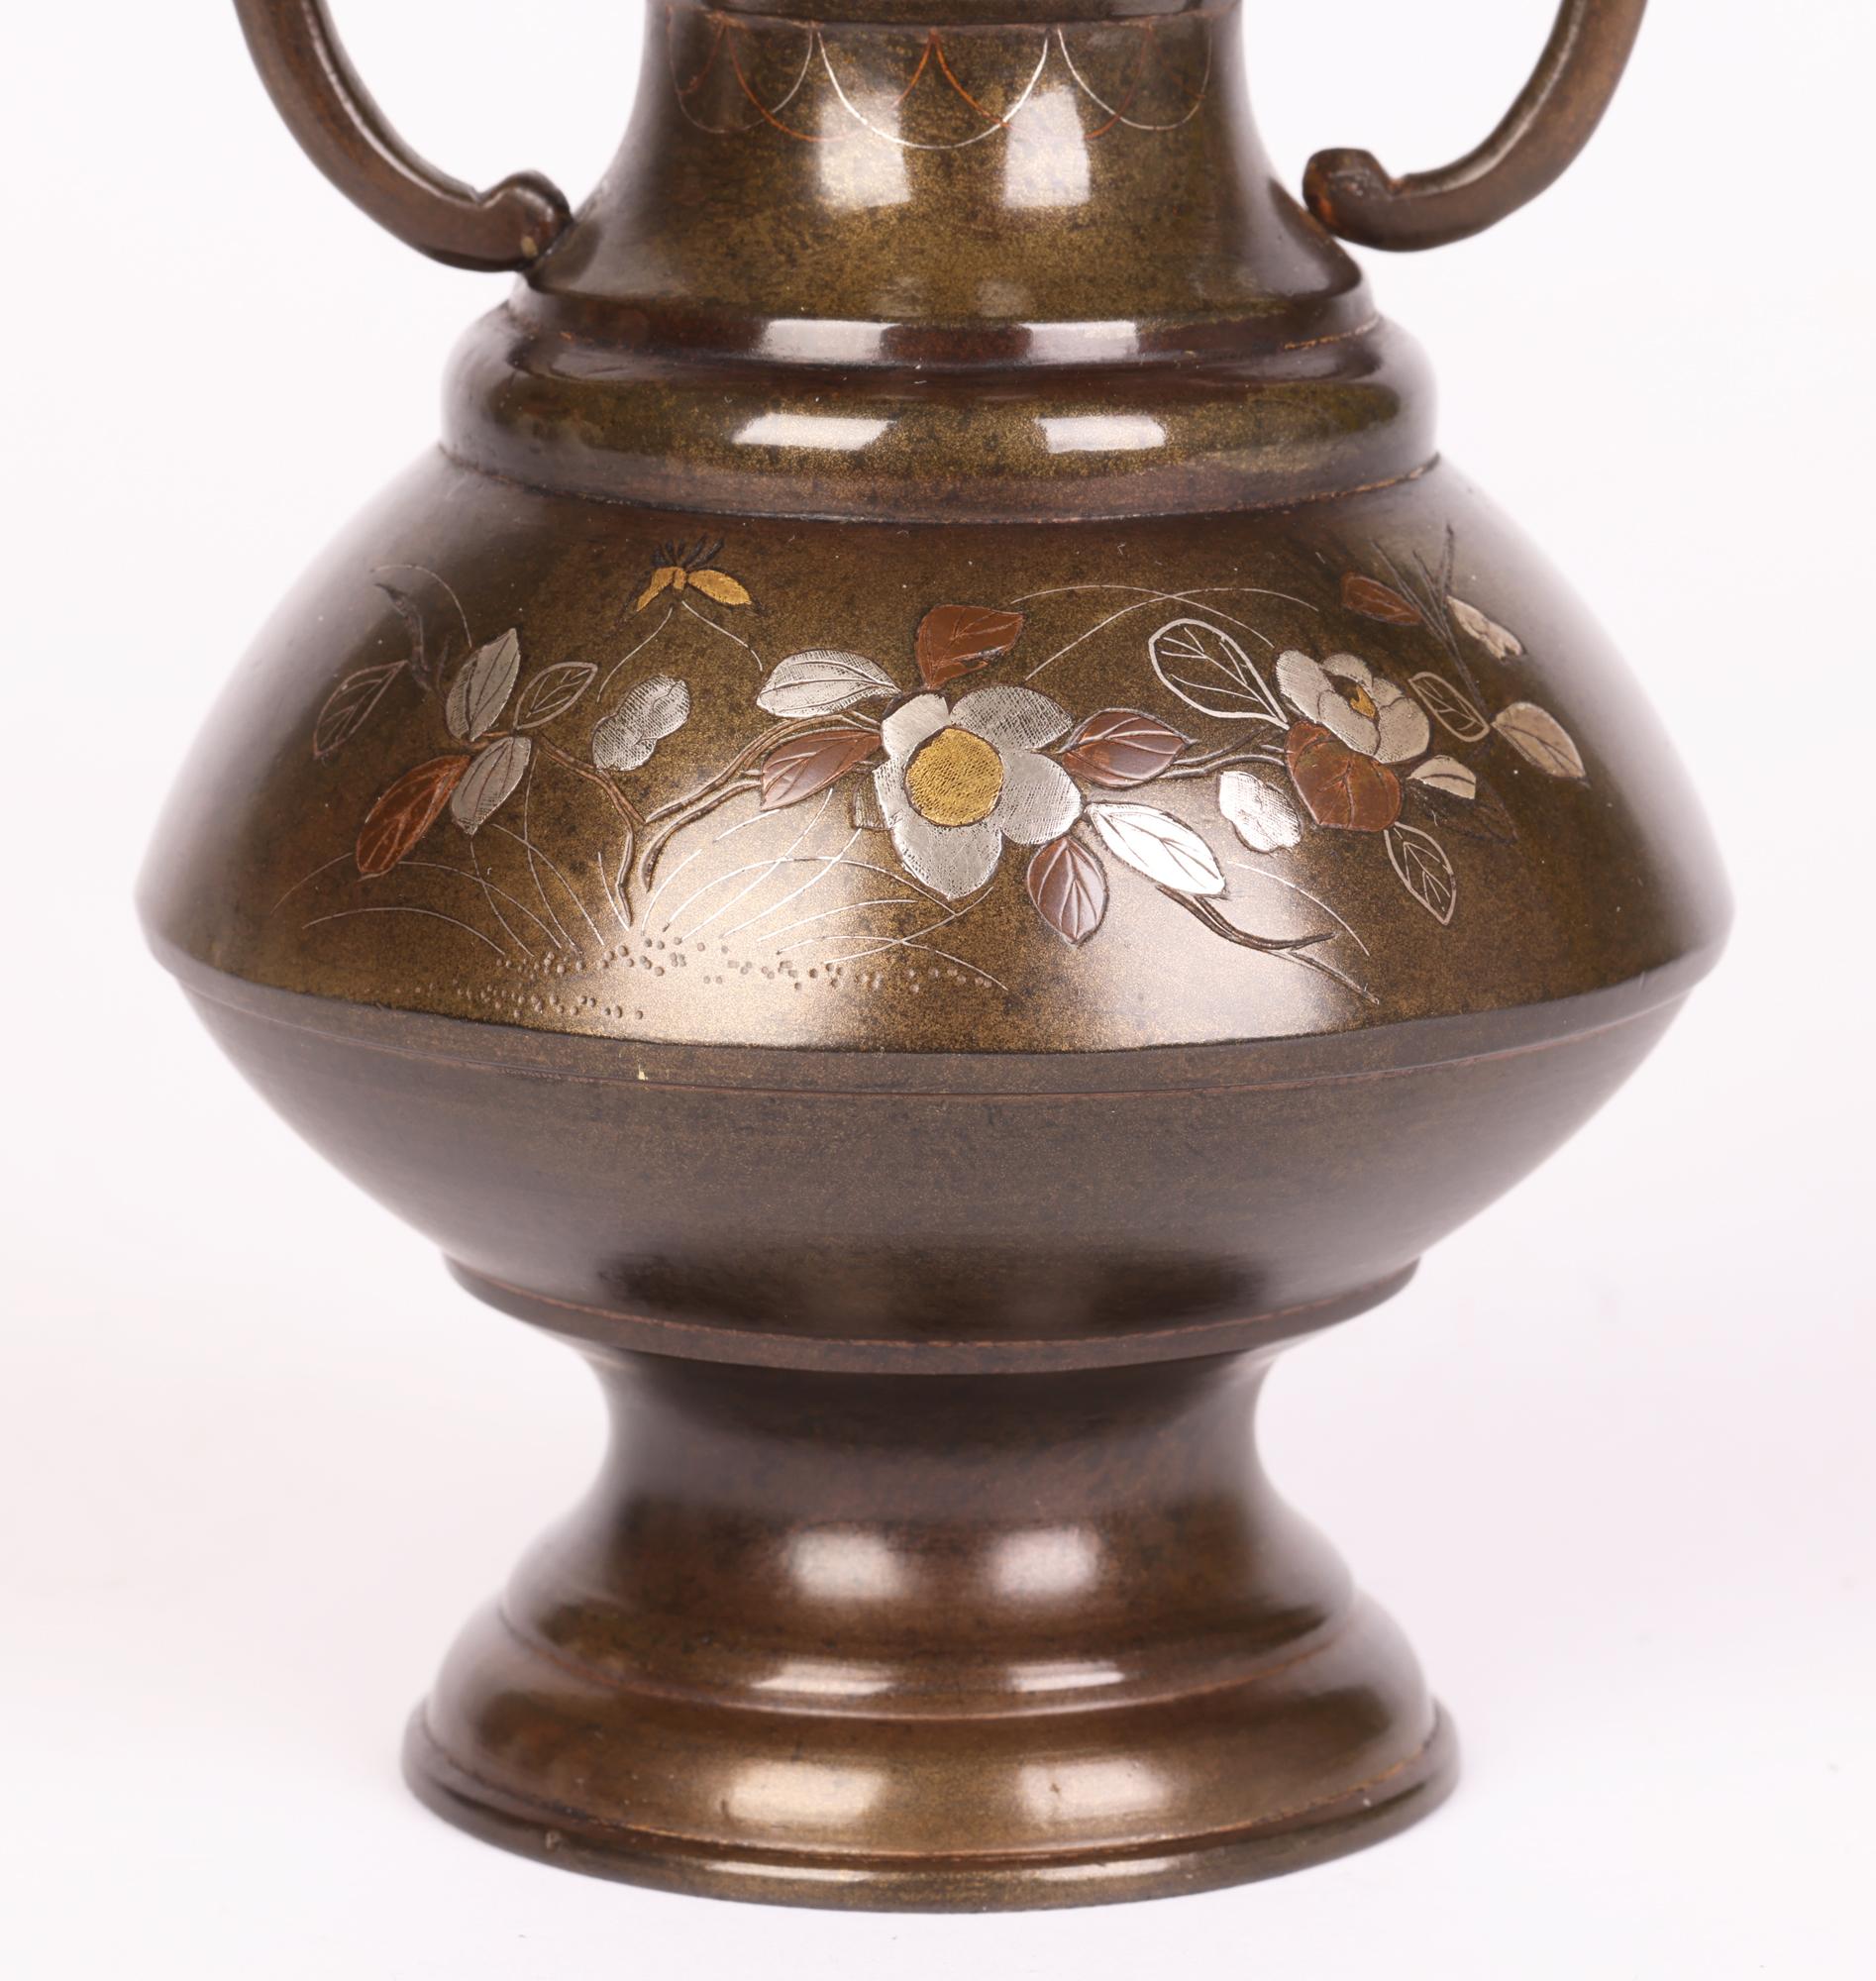 A fine antique Japanese Meiji twin handled bronze vase decorated with floral designs in silver, brass and copper inlay dating from the 19th century. The vase stands raised on a round pedestal foot with narrow stem and shaped round lower body with a